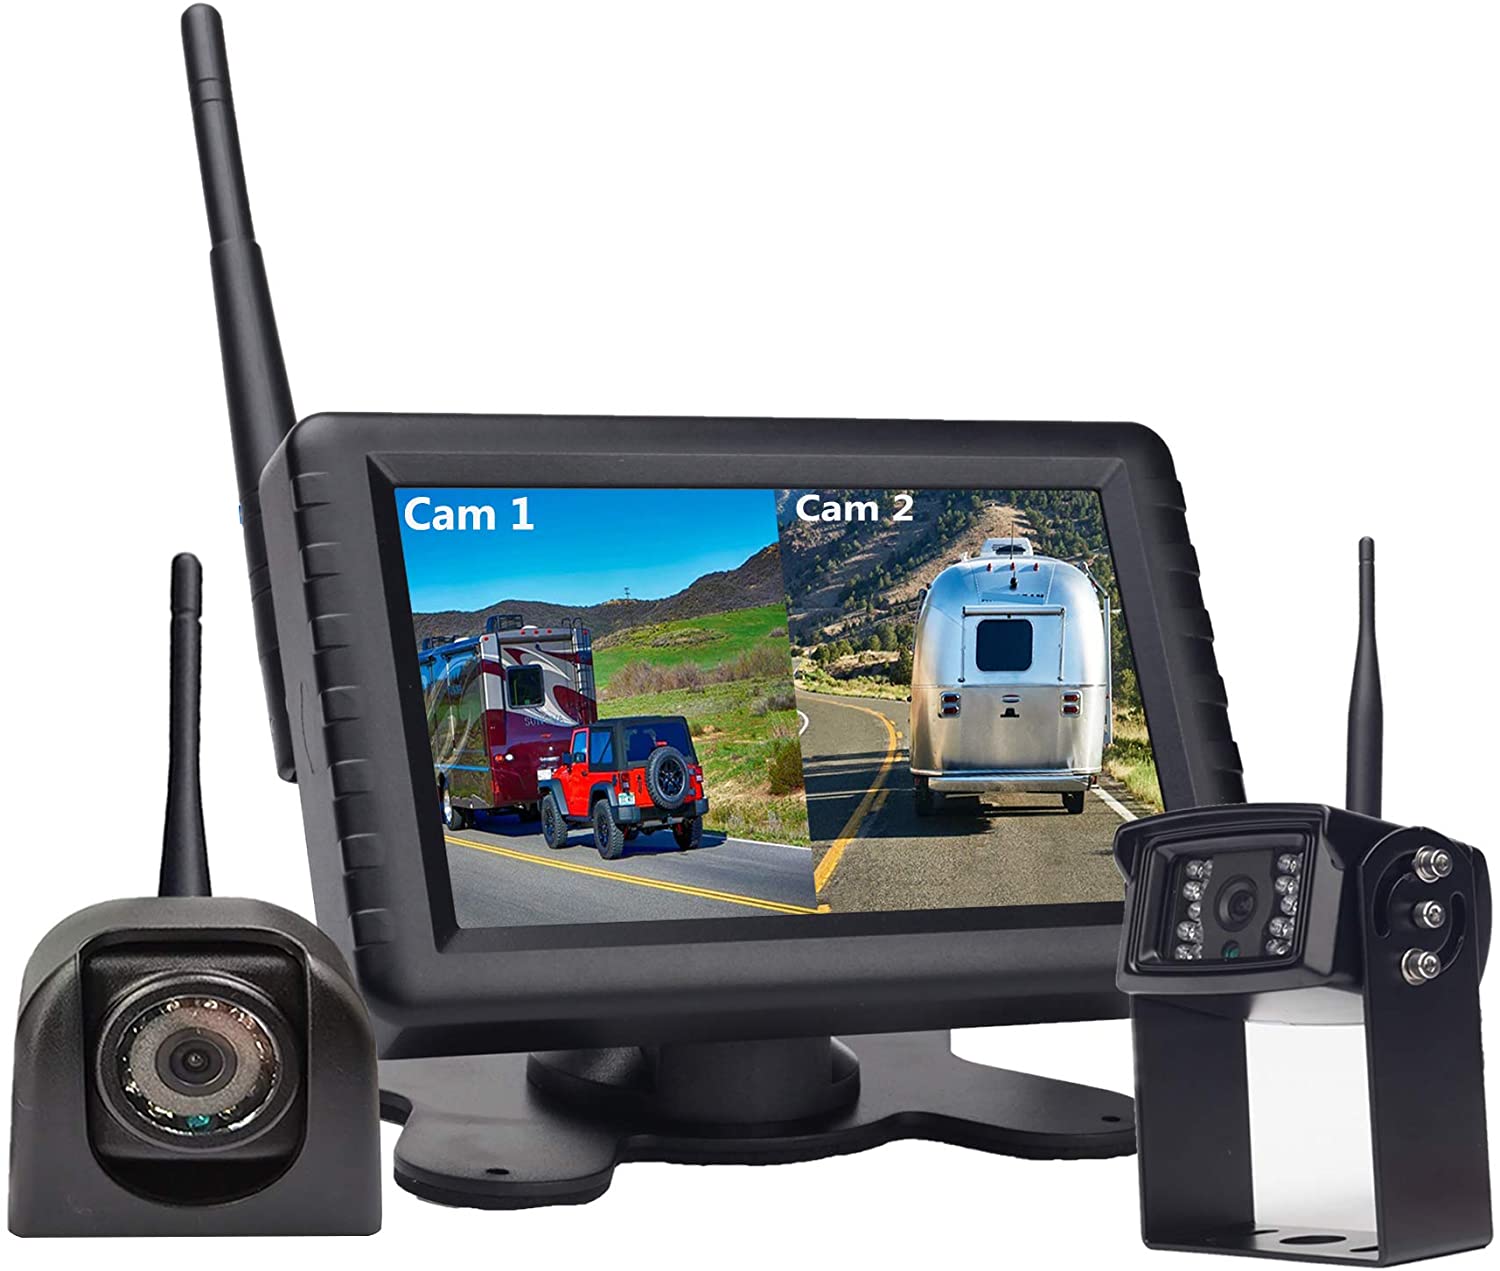 Wireless Backup Camera System with Rear & Side View Camera,720P Reverse Backup Camera Kit with 5” Monitor Support Split Screen, Waterproof IP69K,for RV Trailer,5th Wheels,Tractor,Forklift (1 Rear View Cam+1 Side Cam)